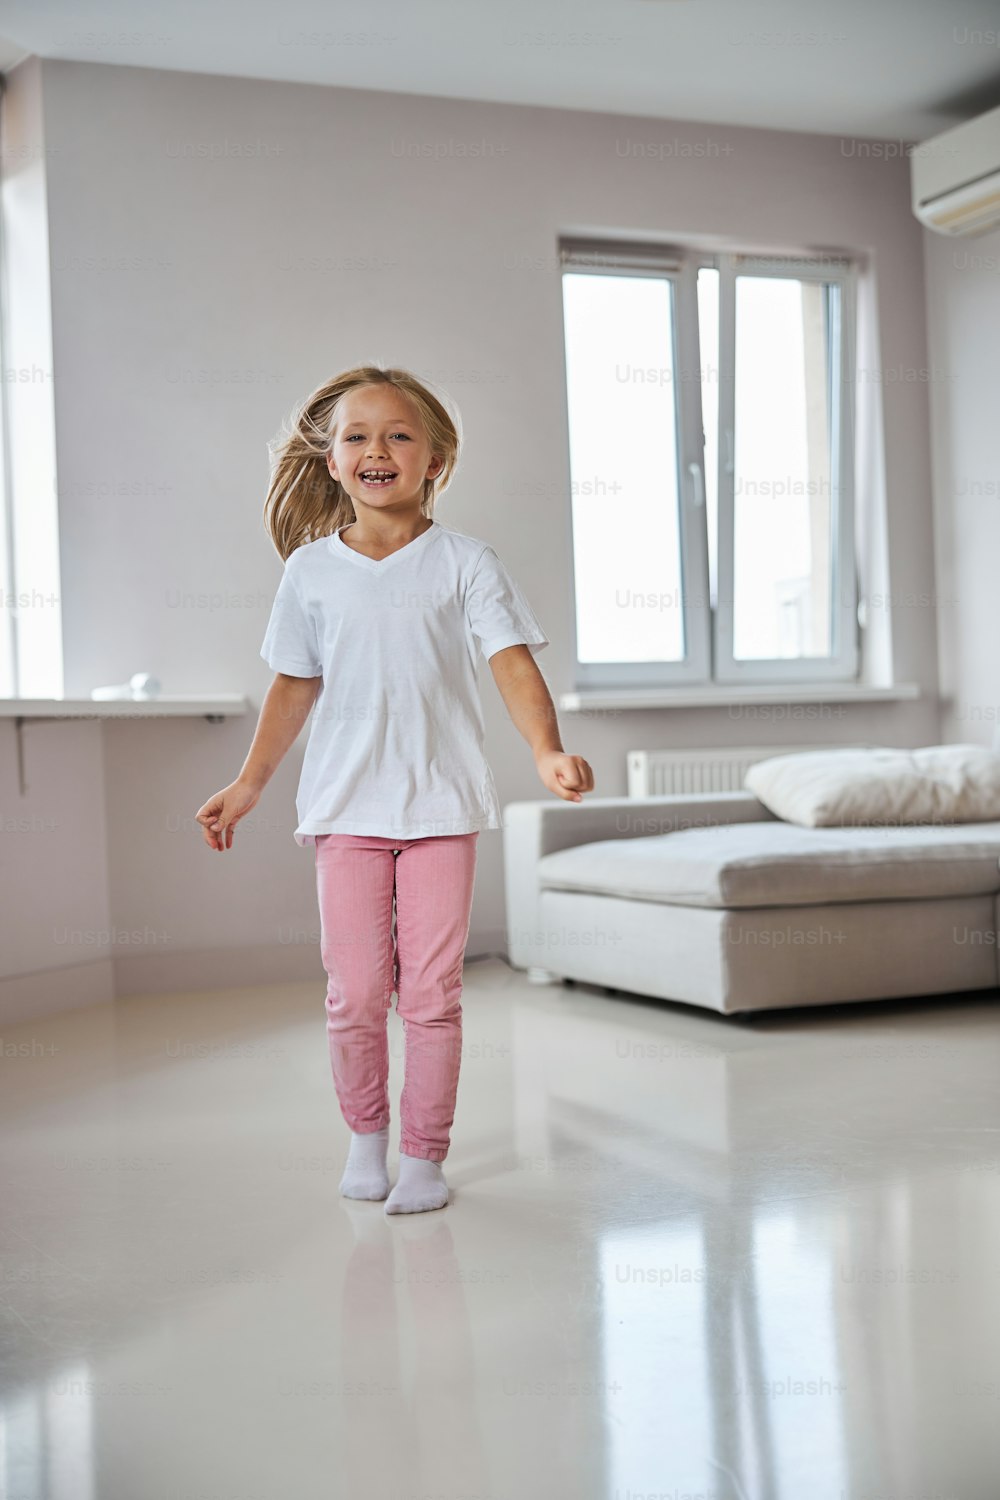 Full length portrait of happy smiling small female child having fun in room inside while standing in front of grey sofa